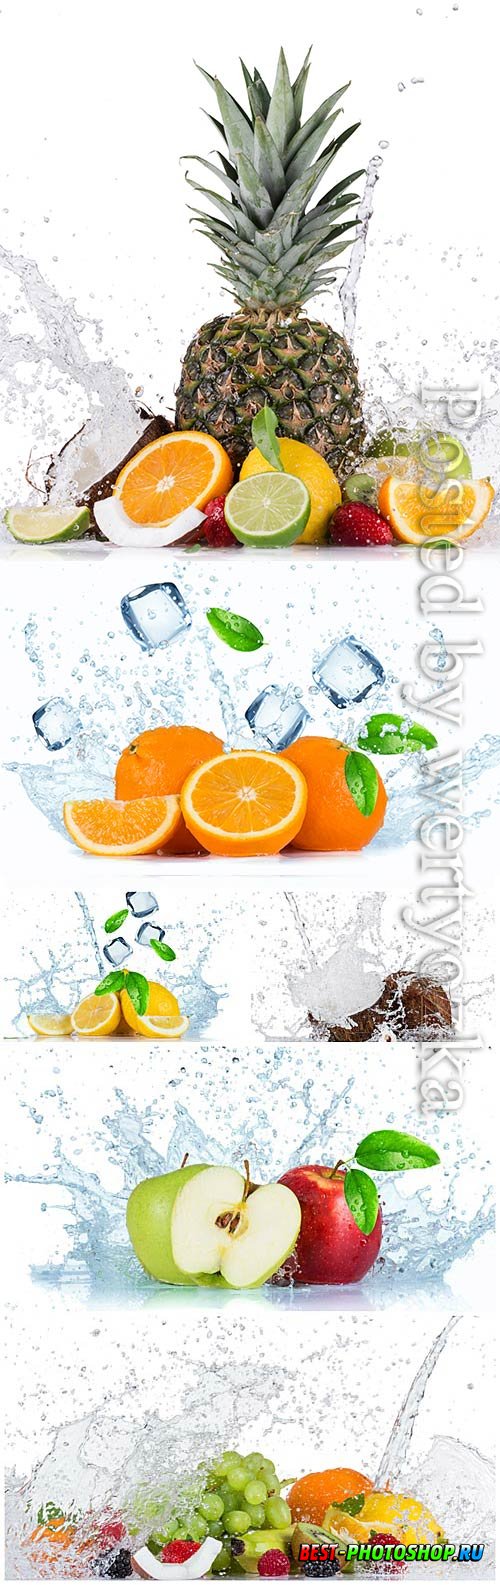 Fruits and berries with slices of lbda and splashing water stock photo